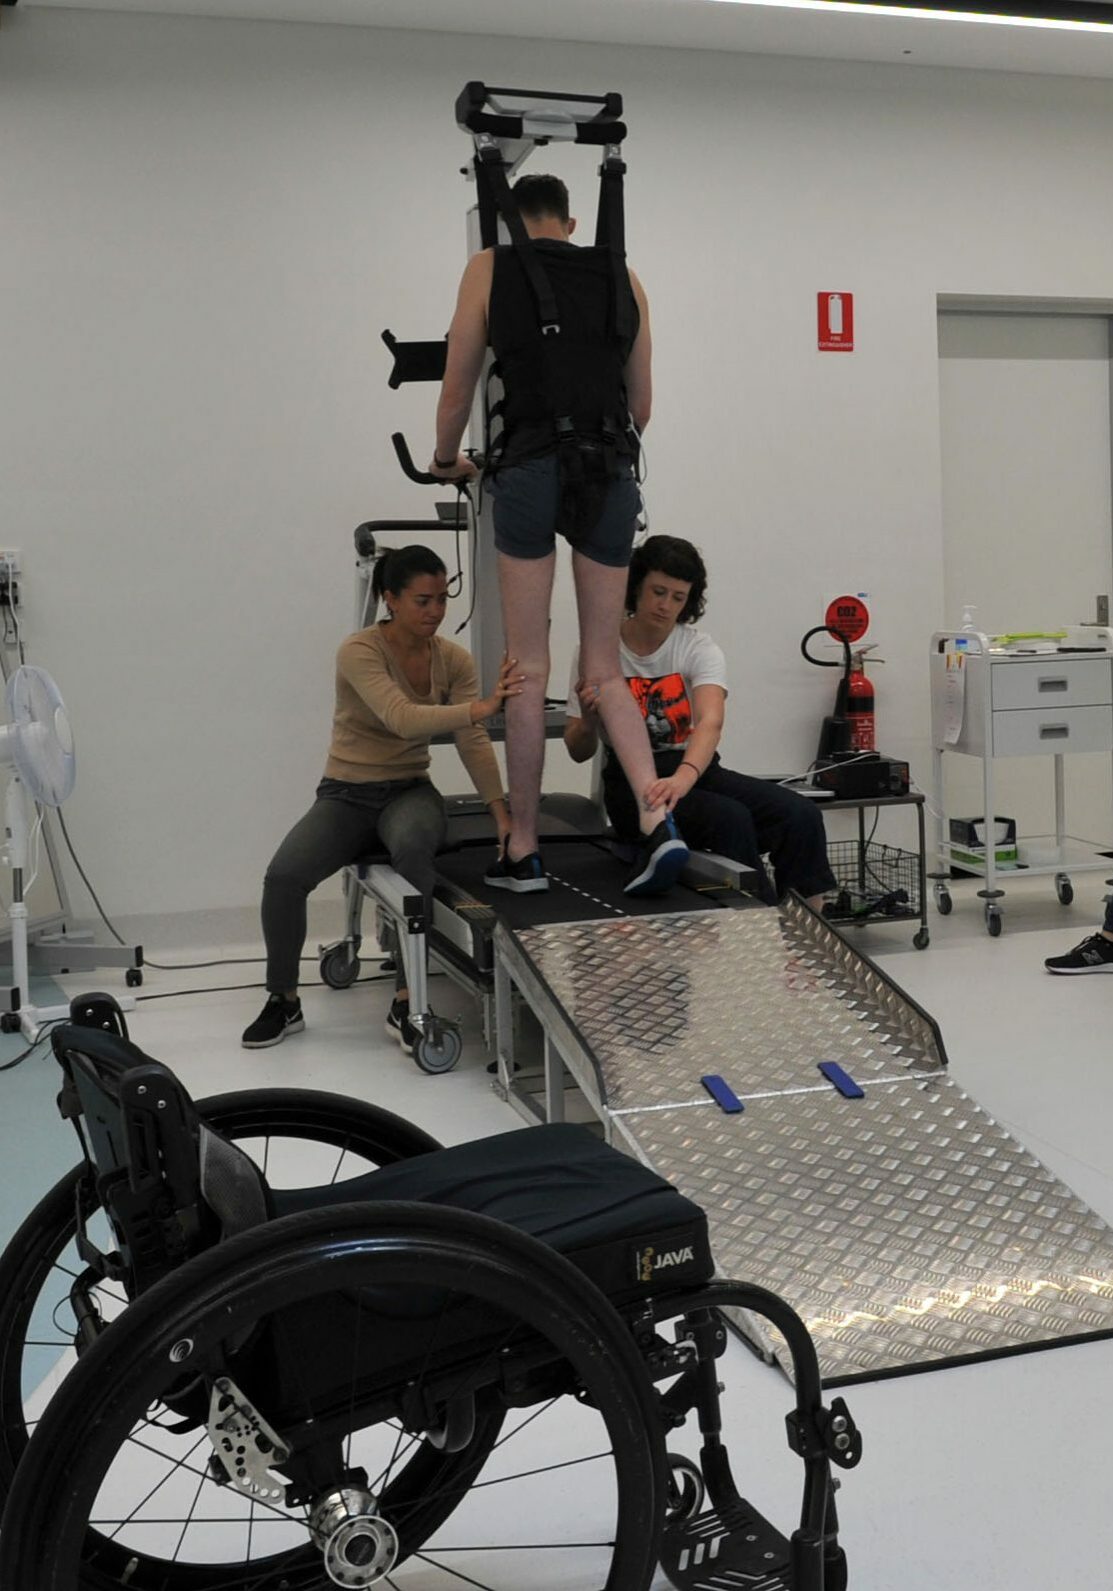 eWalk trial participant on treadmill with two physiotherapists and researcher, with their wheelchair in the foreground